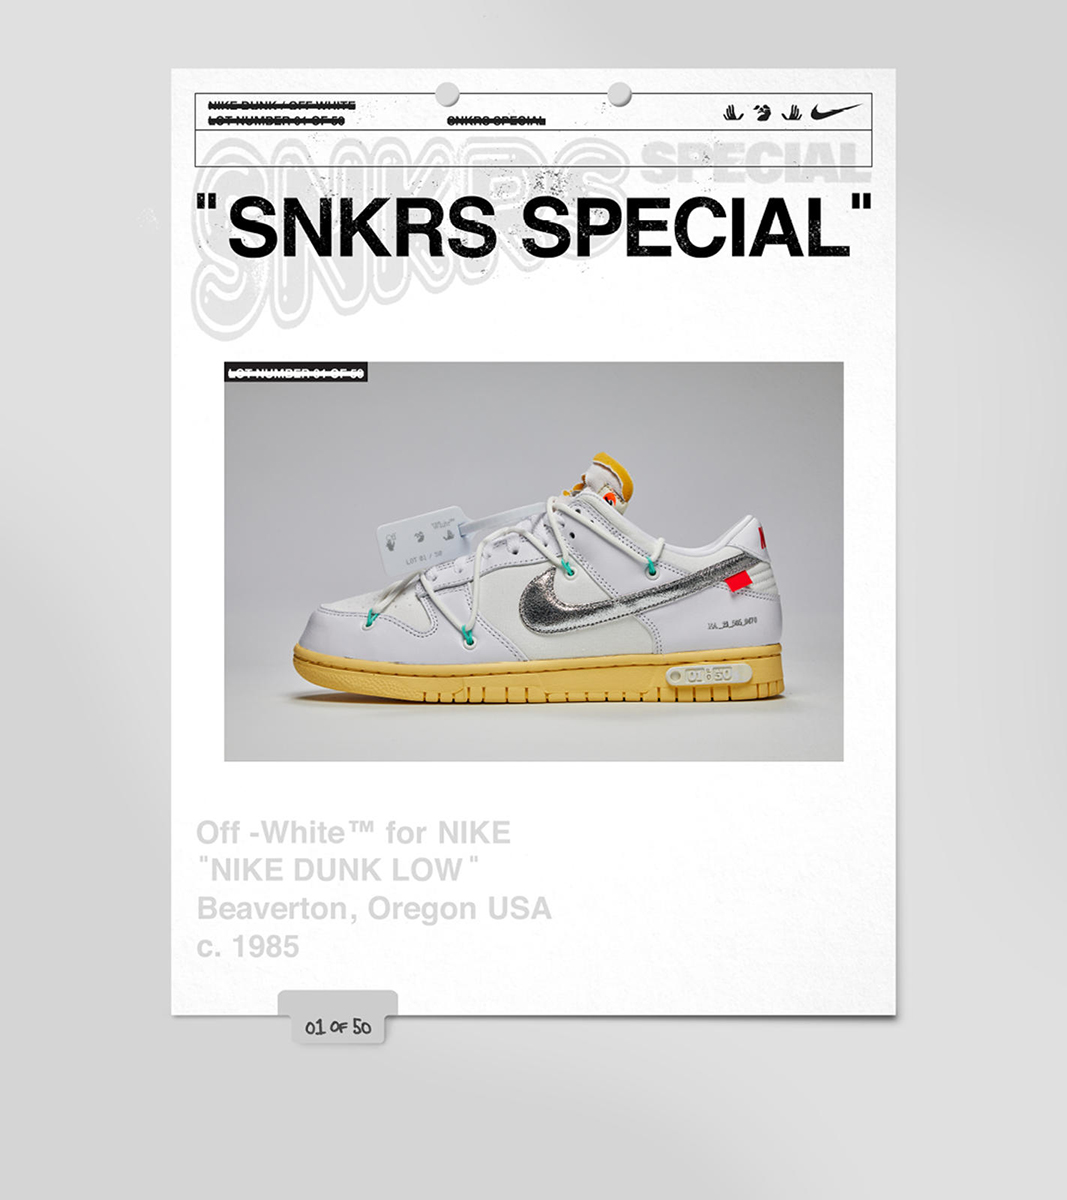 This Is How Get That SNKRS Exclusive Access